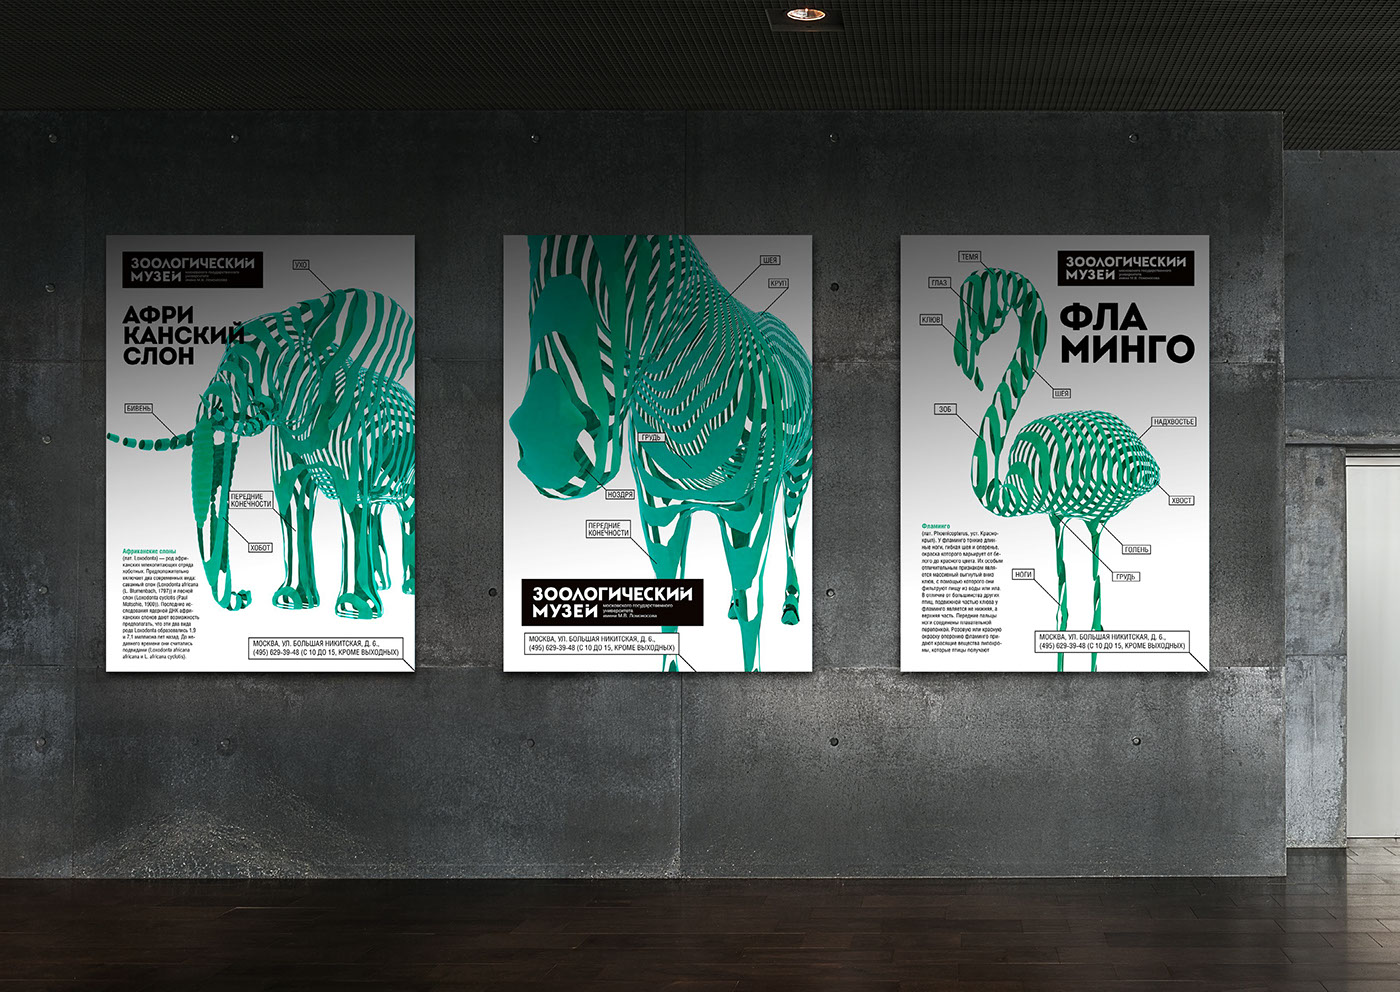 zoological Museum zoology museum animals navigation poster design cutting turquoise schoolbook Moscow